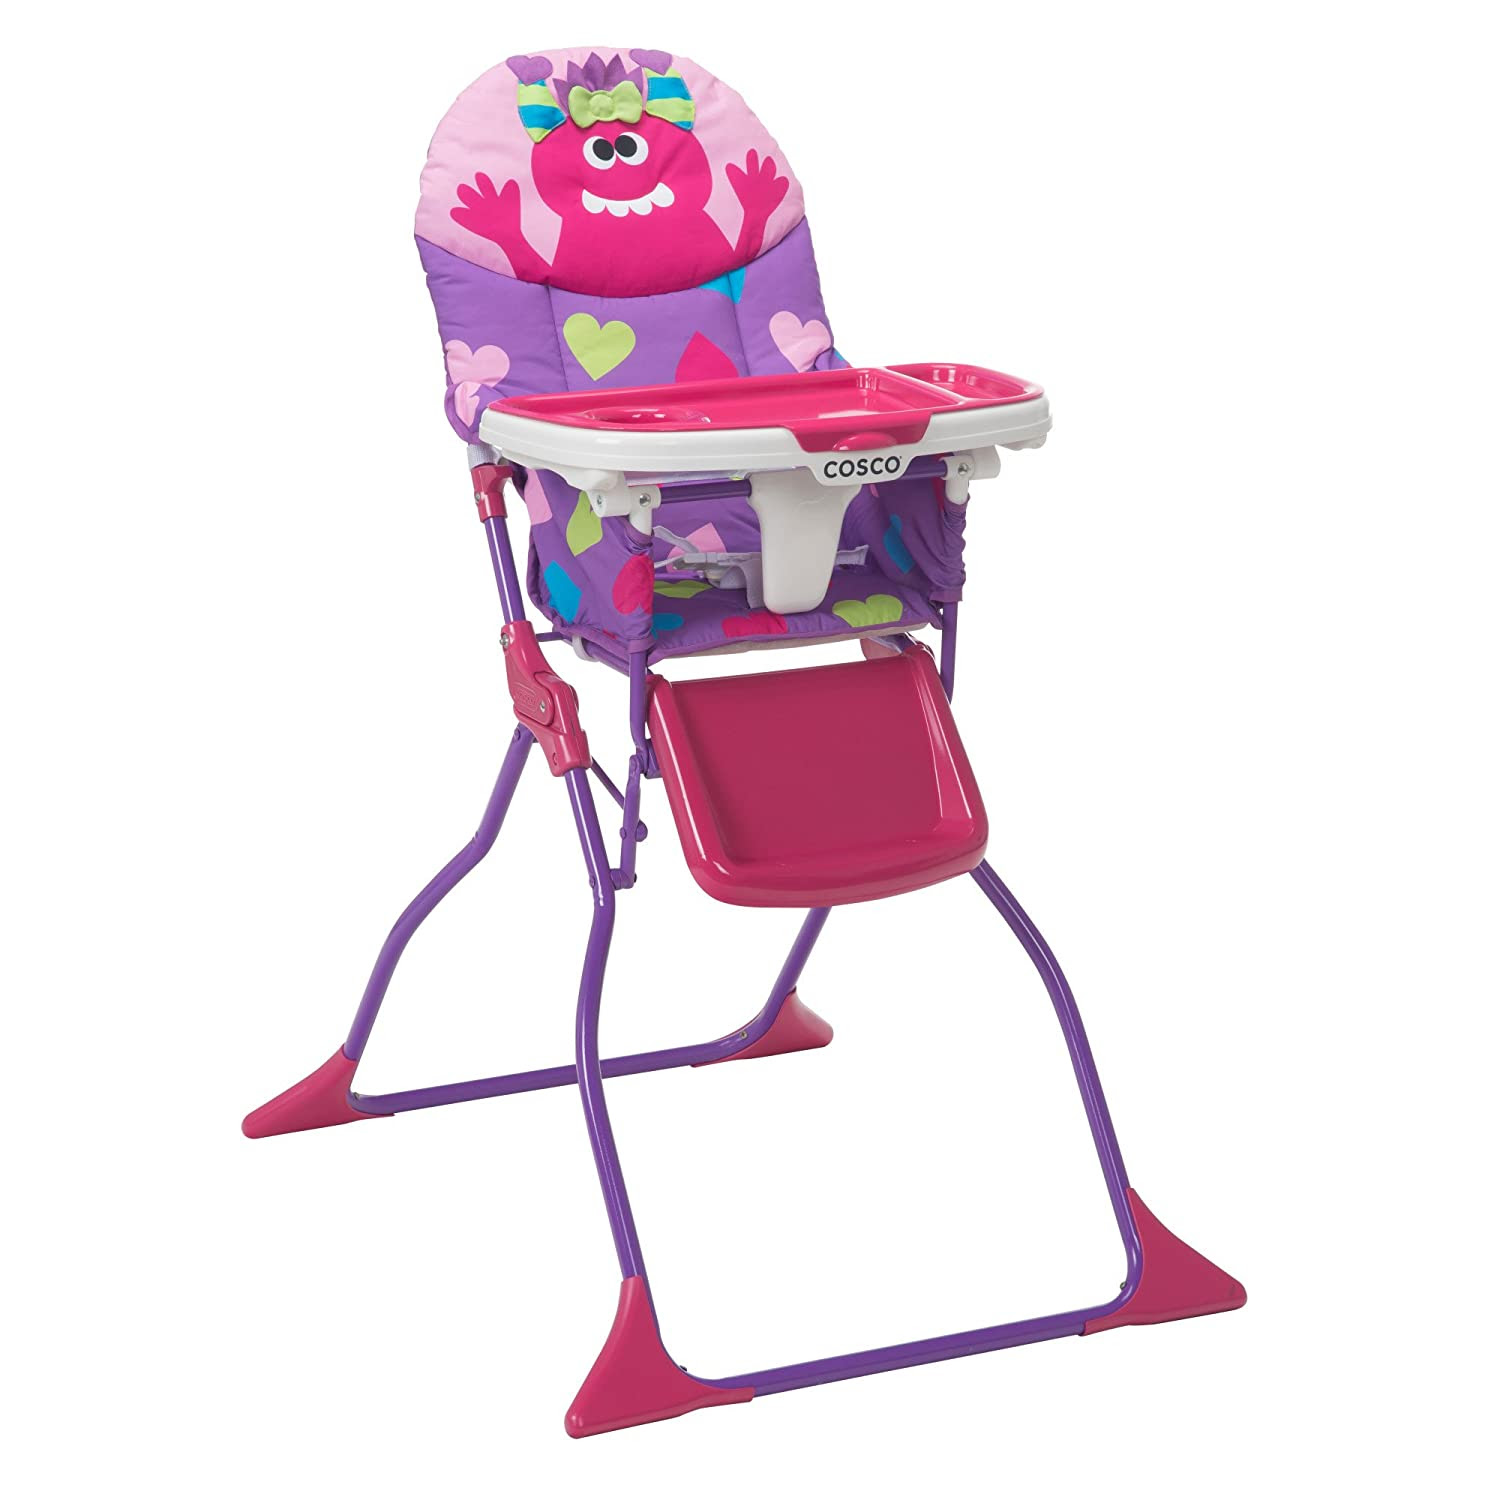 Cosco Simple Fold Deluxe High Chair. 900 units. EXW Los Angeles $29.50 unit.